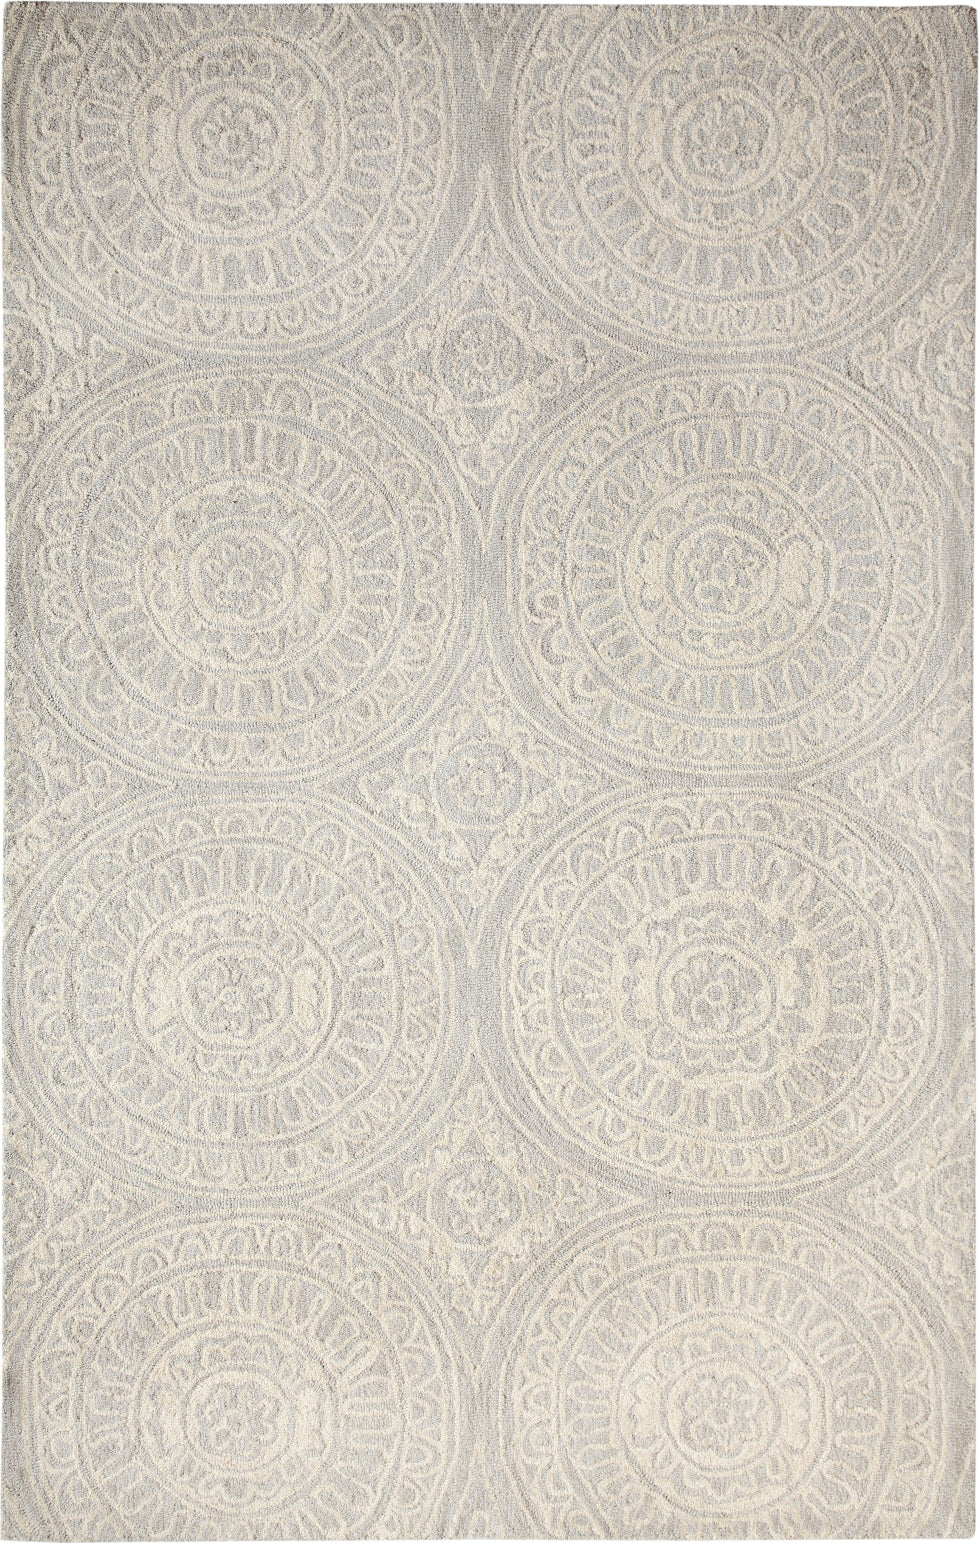 Dynamic Rugs Galleria 7866 Silver Area Rug main image